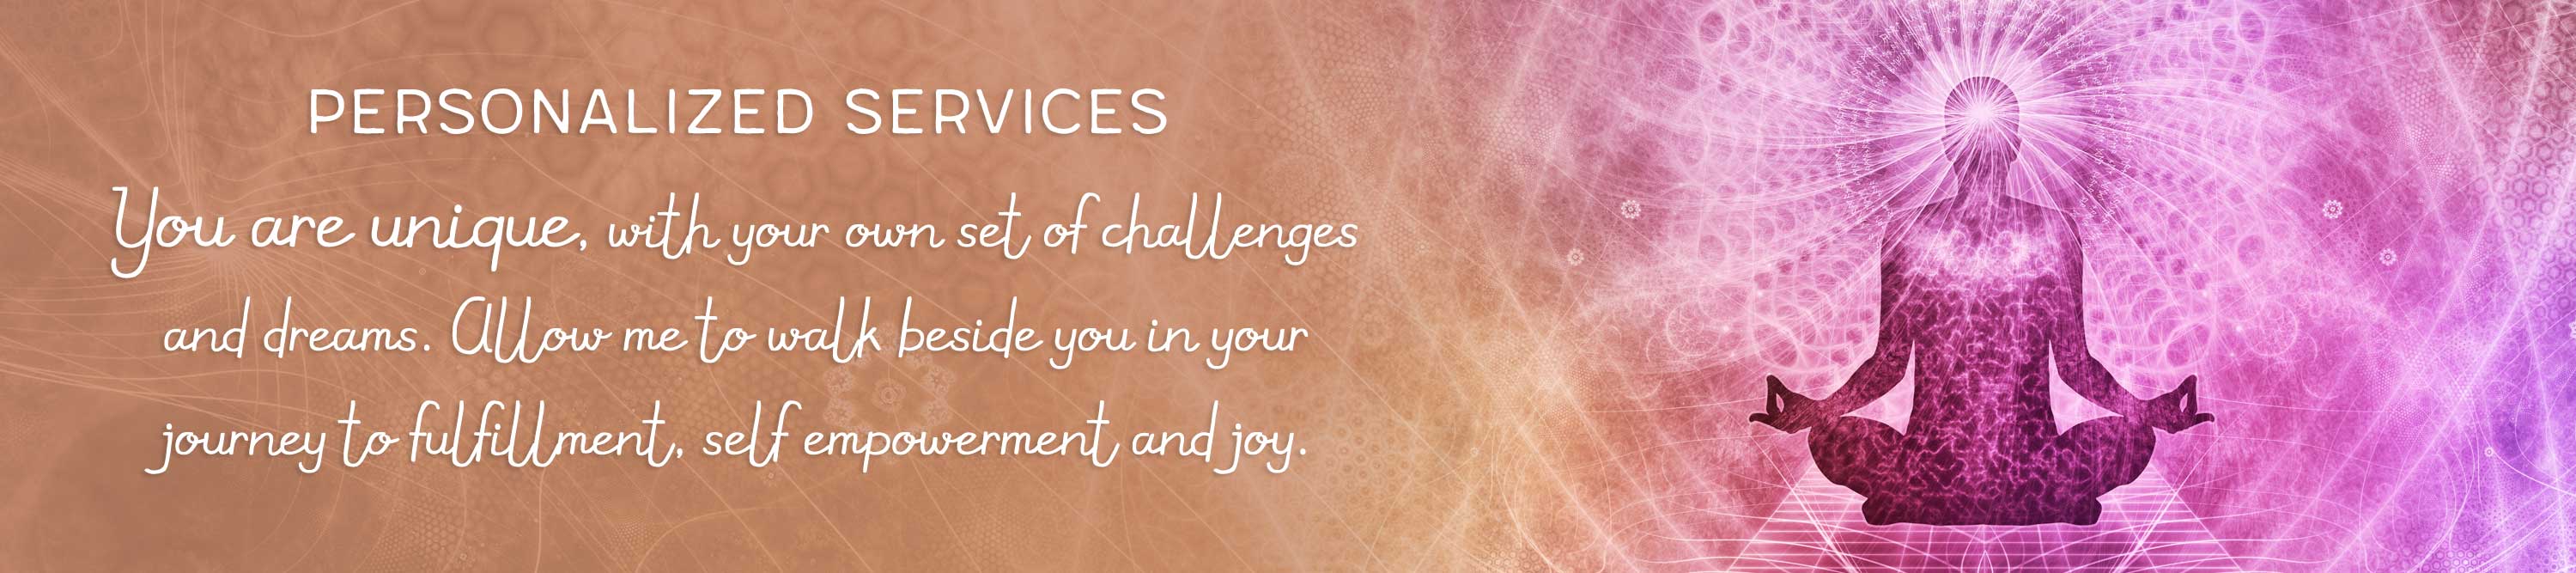 Personalized Services: You are unique, with your own set of challenges and dreams. Allow me to walk beside you in your journey to fulfillment, self empowerment and joy.